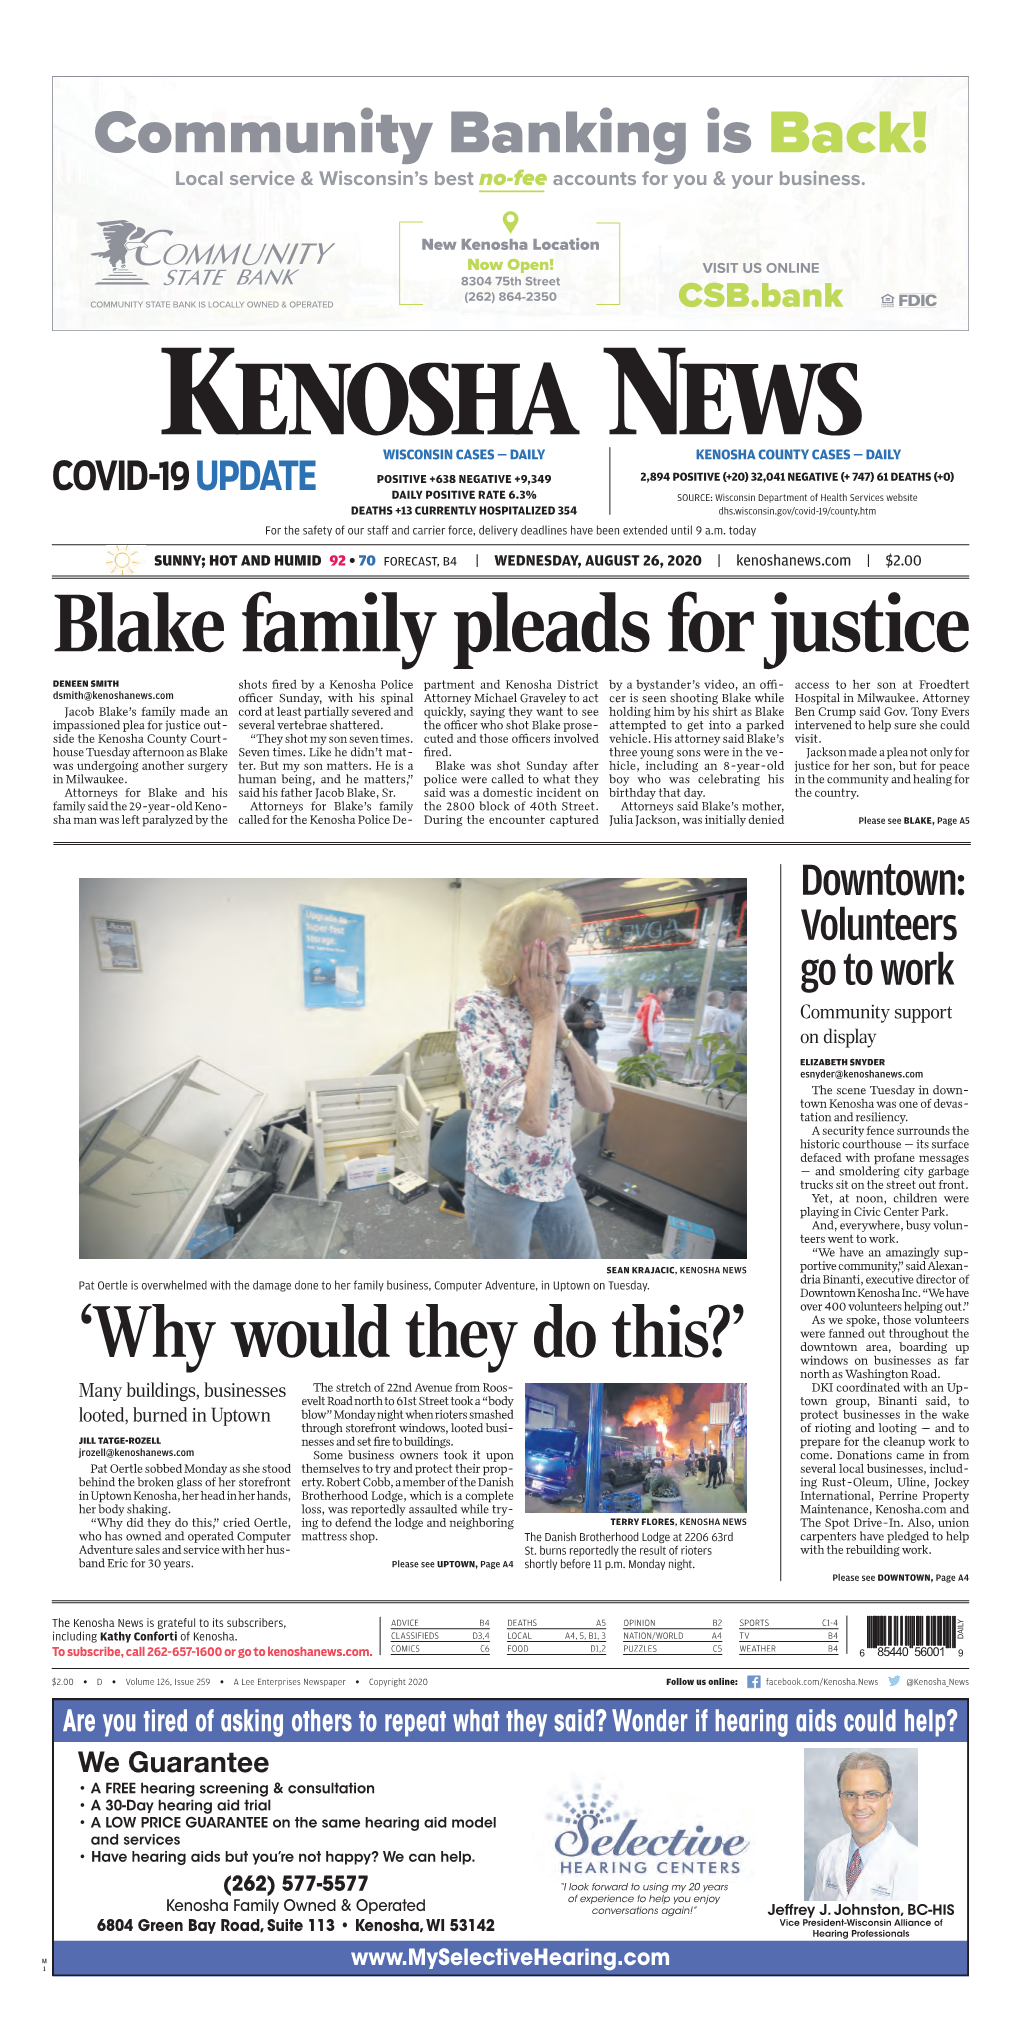 Blake Family Pleads for Justice